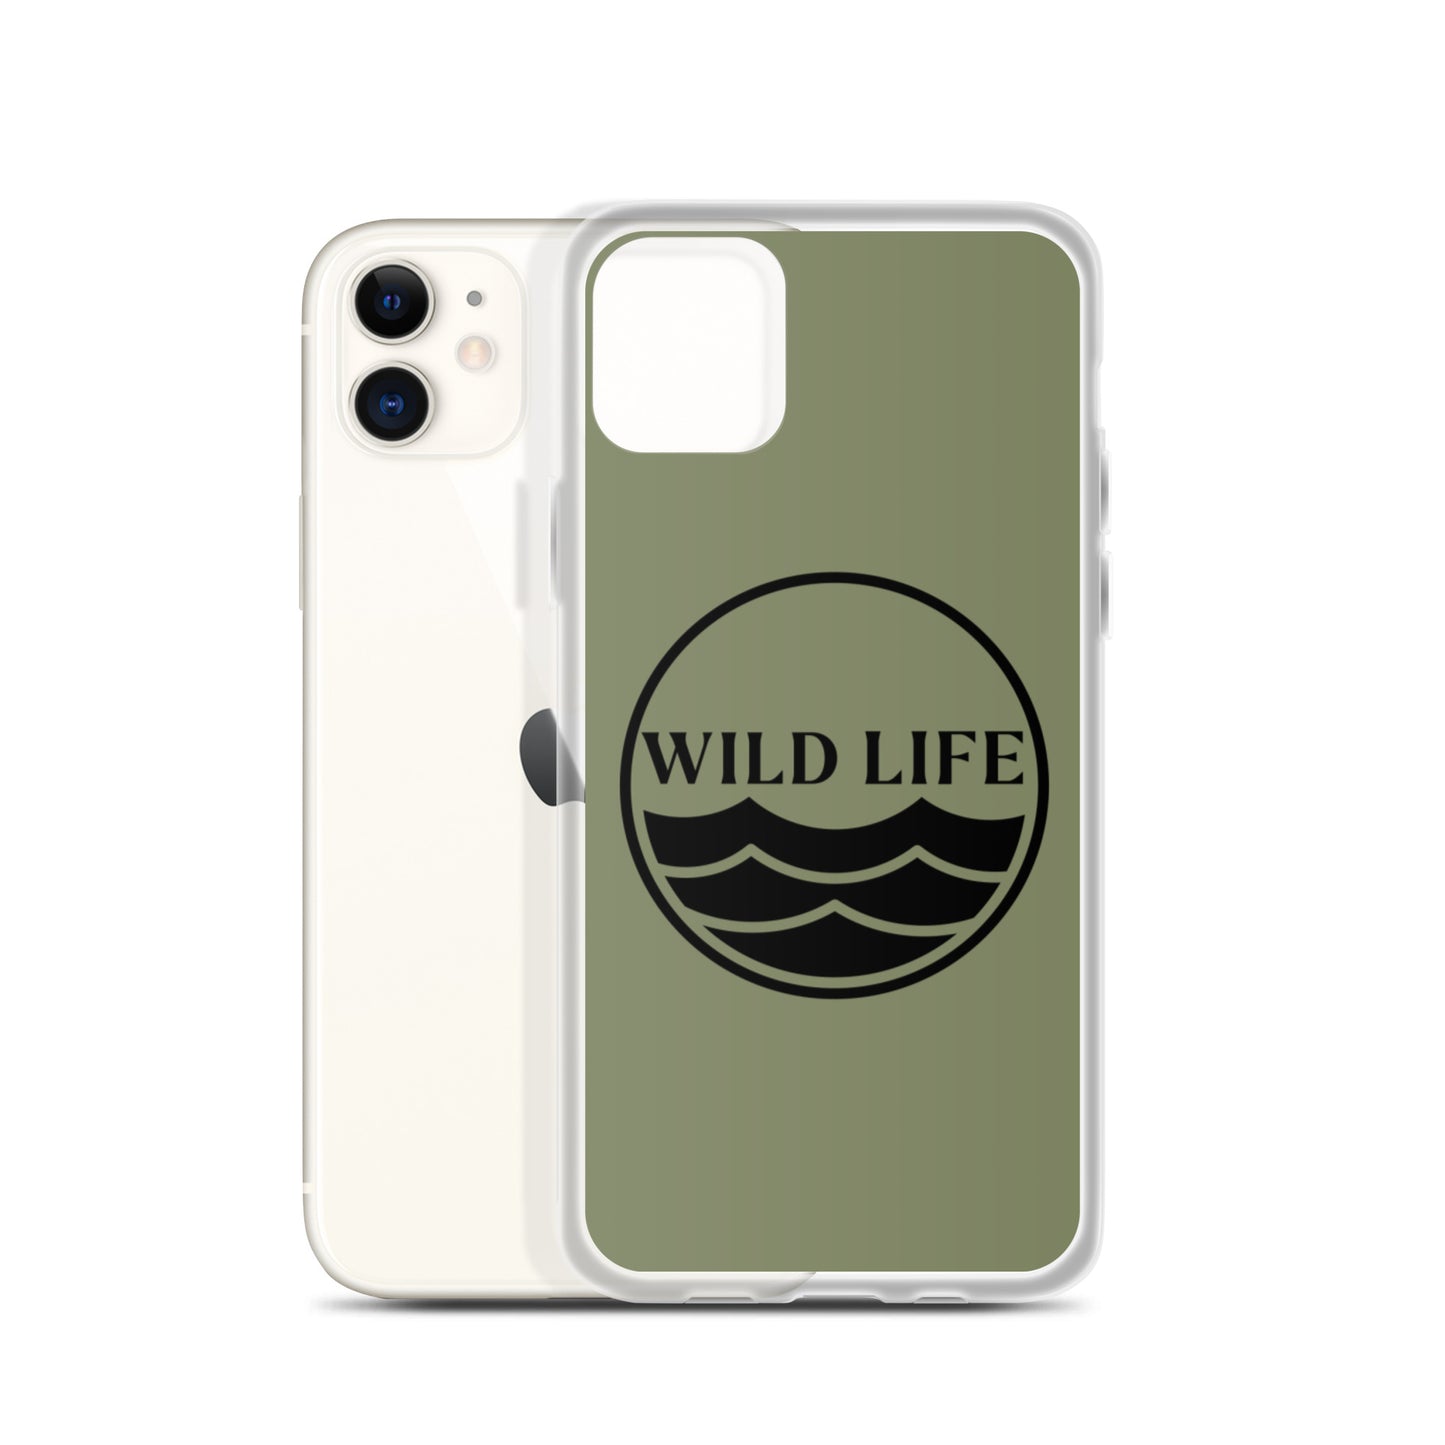 WILD LIFE iPhone Case - Forest